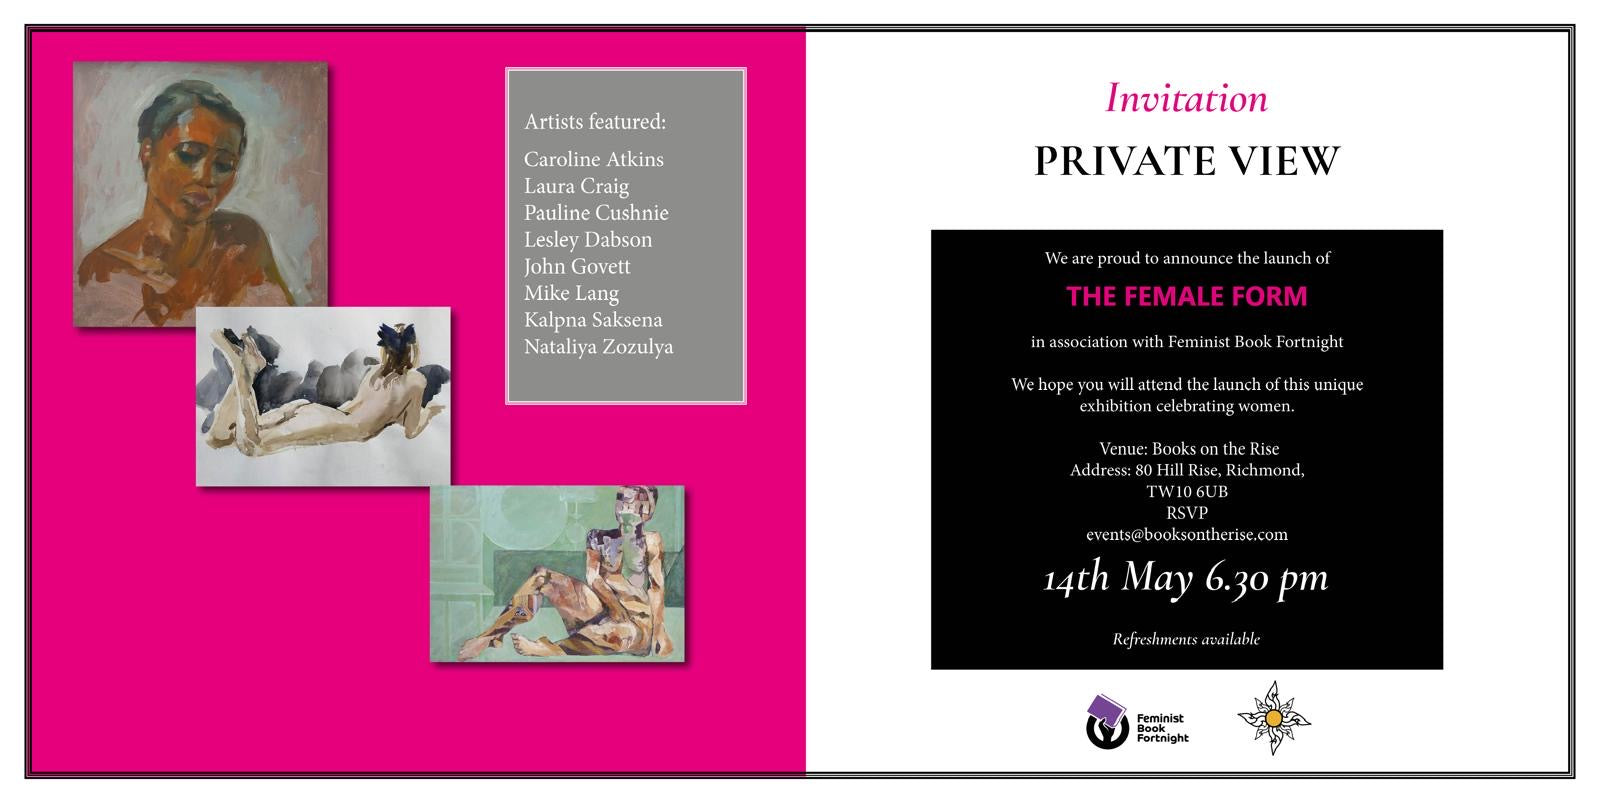 The Female Form Exhibition